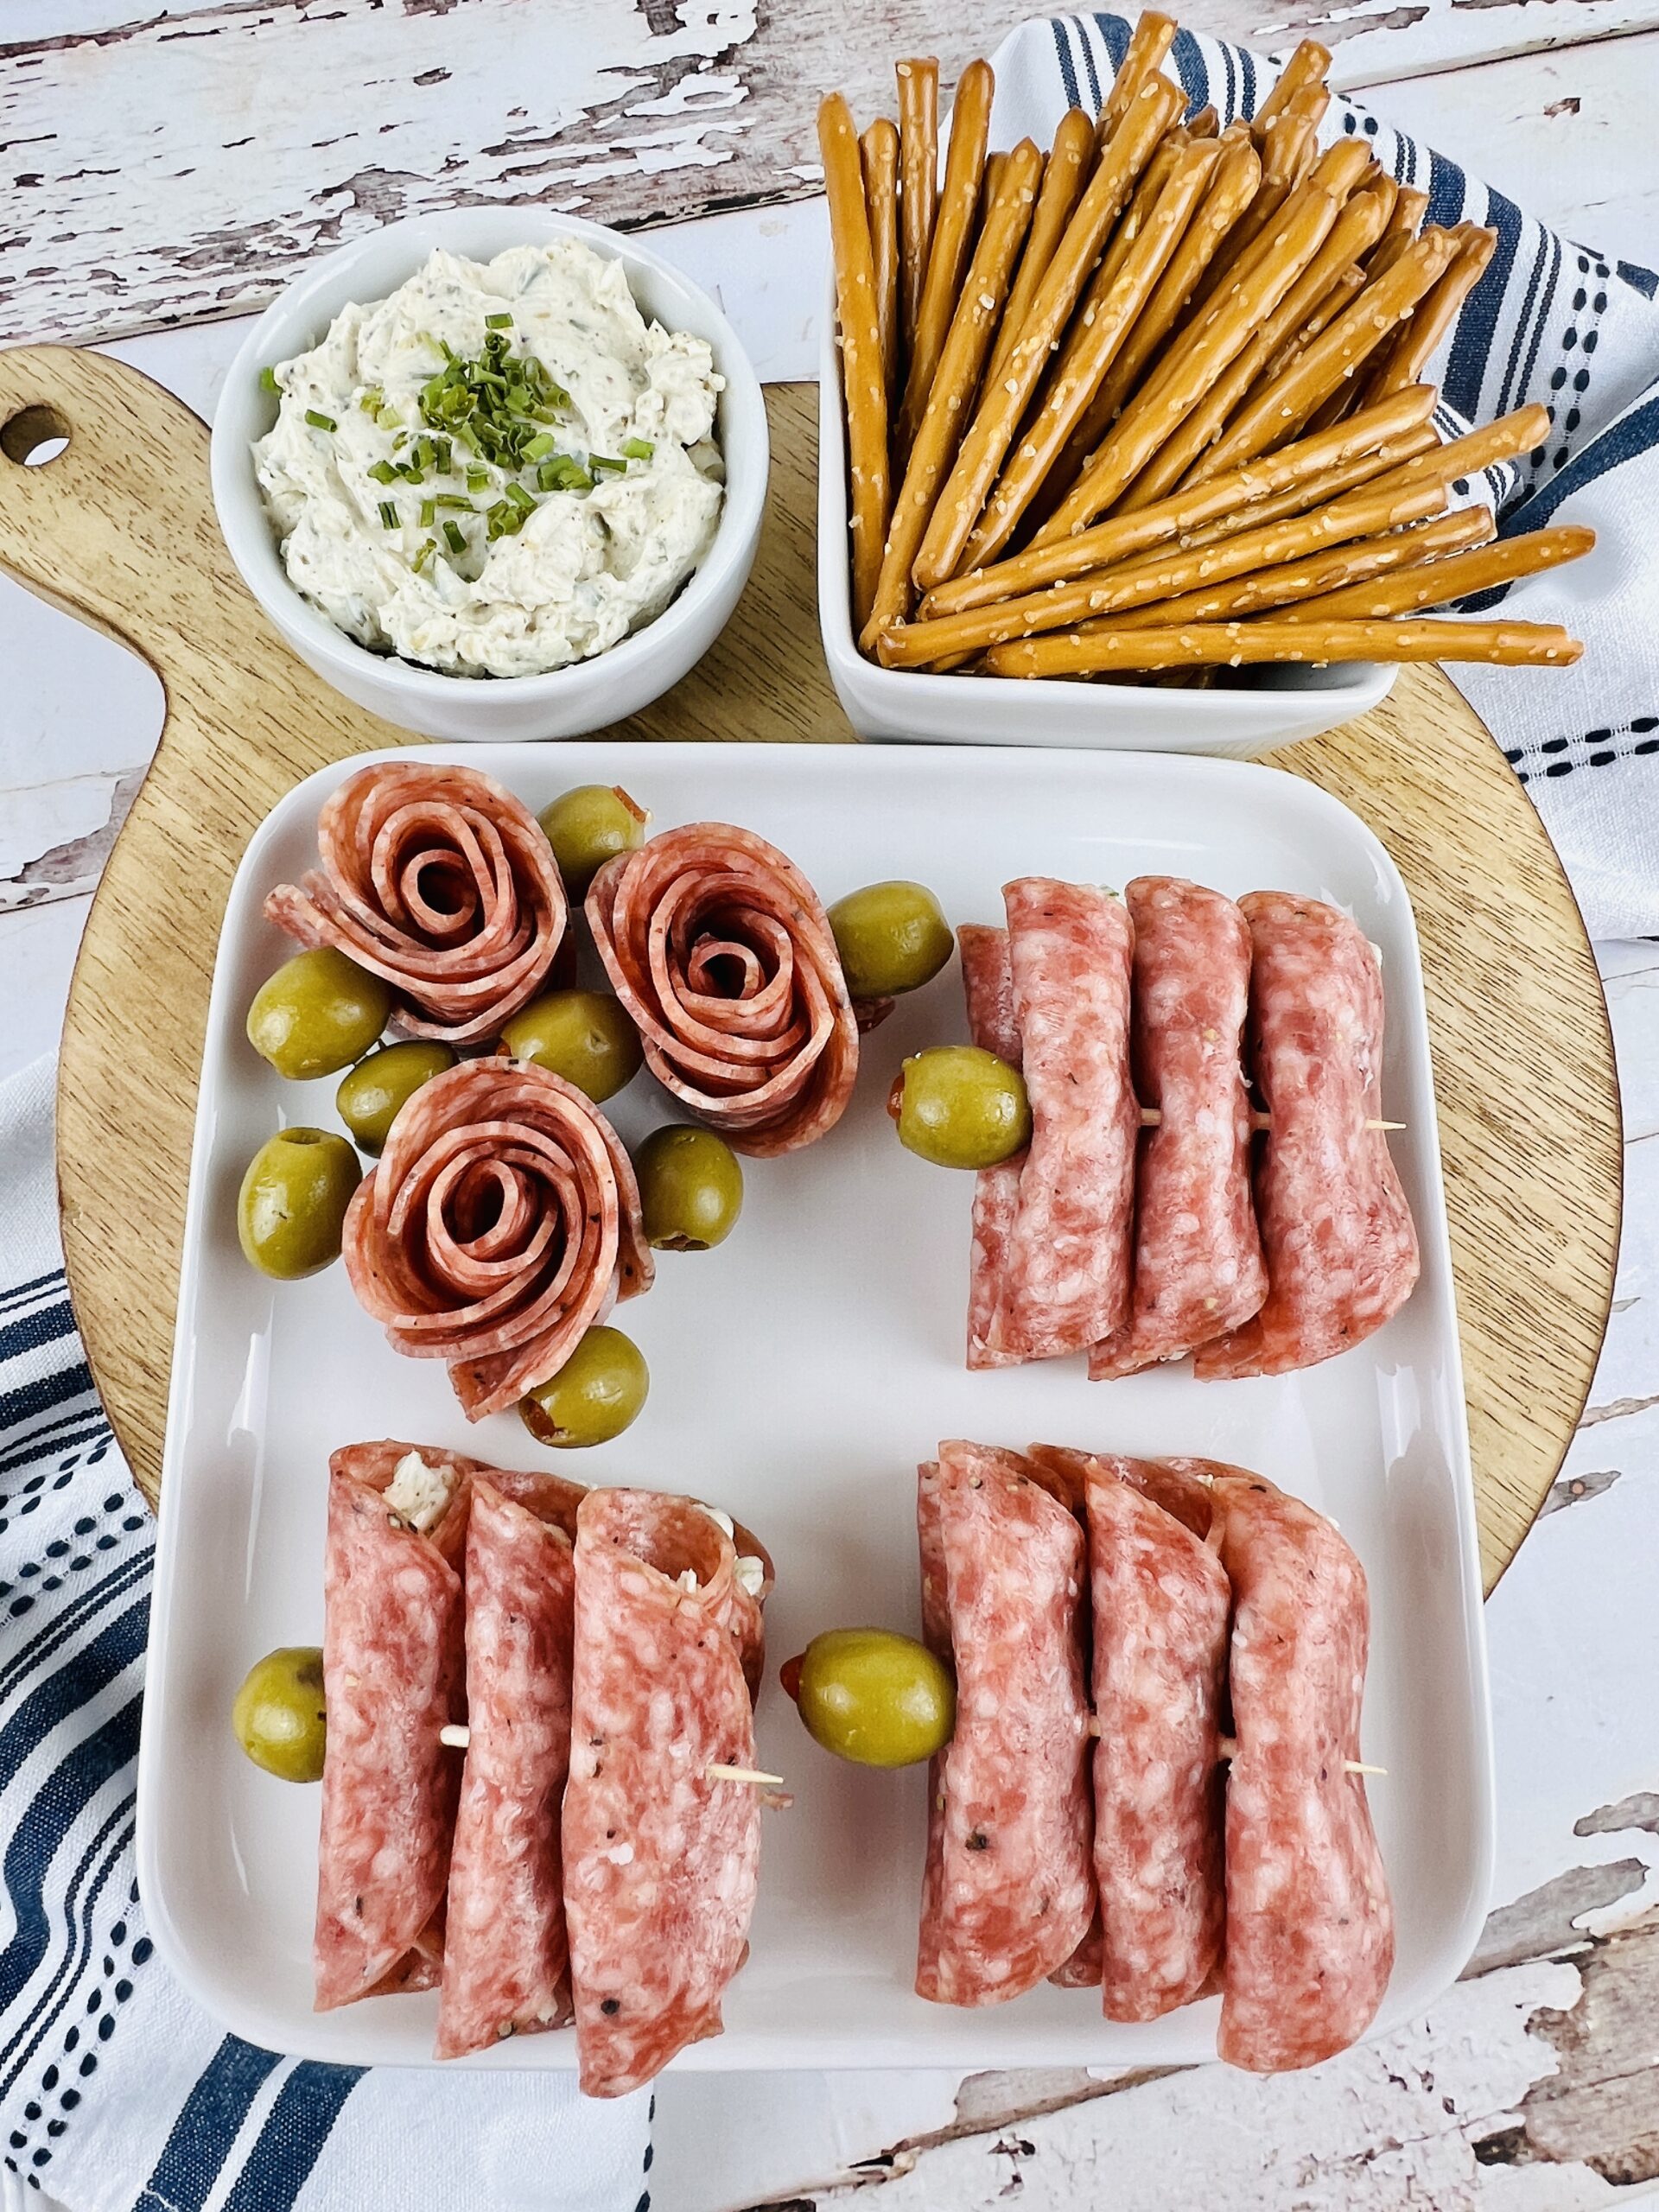 A plate full of the rollups with some salami roses.